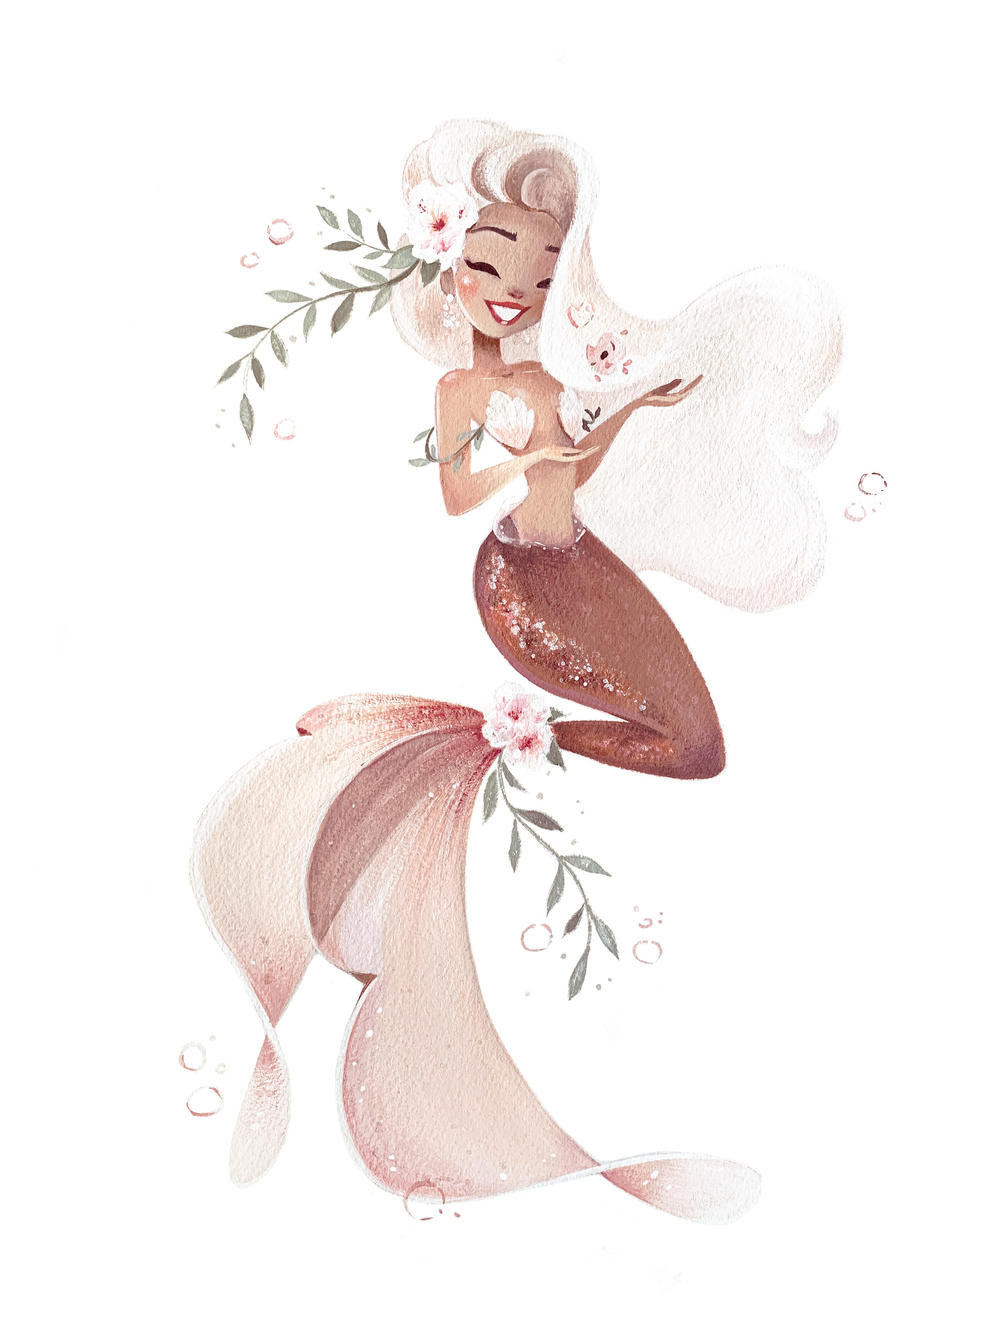 Artist Liana Hee has been using gouache paints to create her mermaids, like this one from 2021 titled <em>Amaryllis.</em>